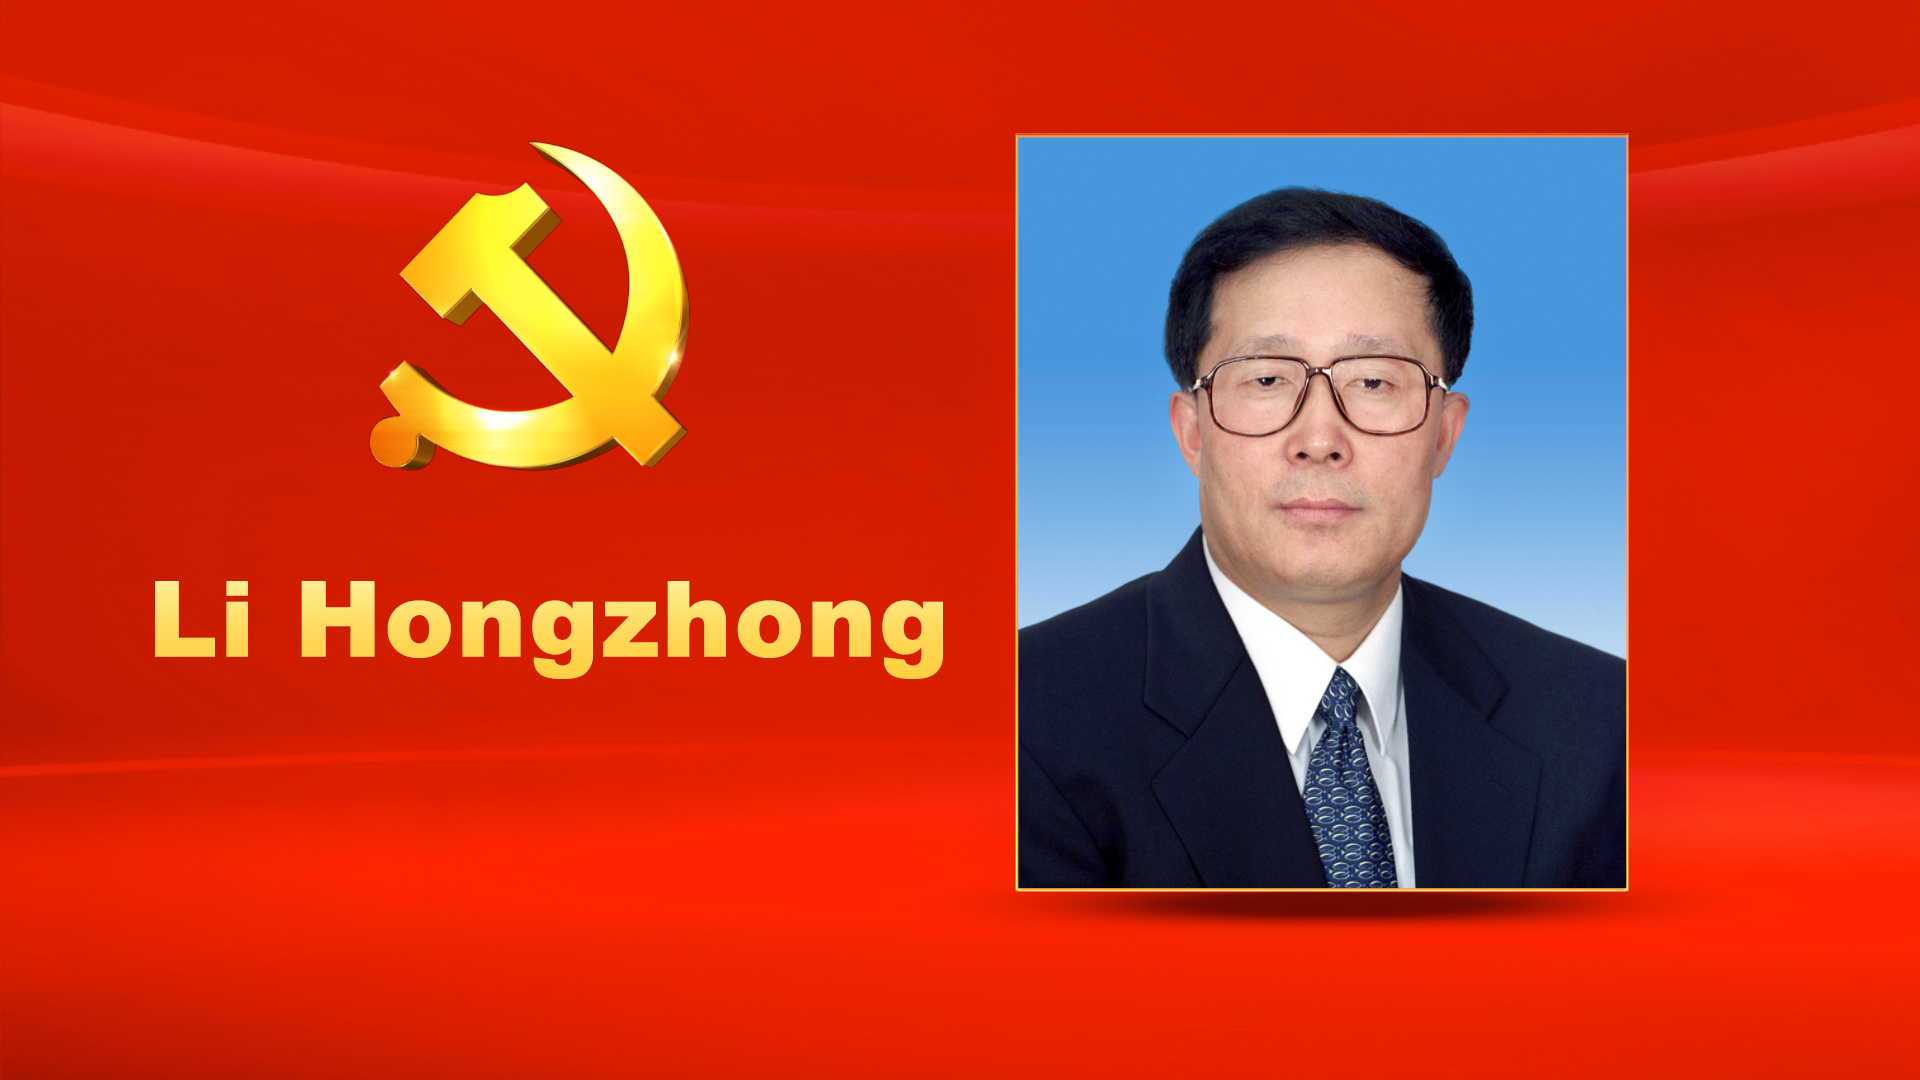 Li Hongzhong, male, Han ethnicity, was born in August 1956 and is from Changle, Shandong Province. He began his first job in August 1975 and joined the Communist Party of China (CPC) in December 1976. Li graduated from Department of History, Jilin University where he completed an undergraduate program in history. He holds a professional title of economist. Li is currently a member of the CPC Central Committee Political Bureau and Secretary of the CPC Tianjin Municipal Committee.